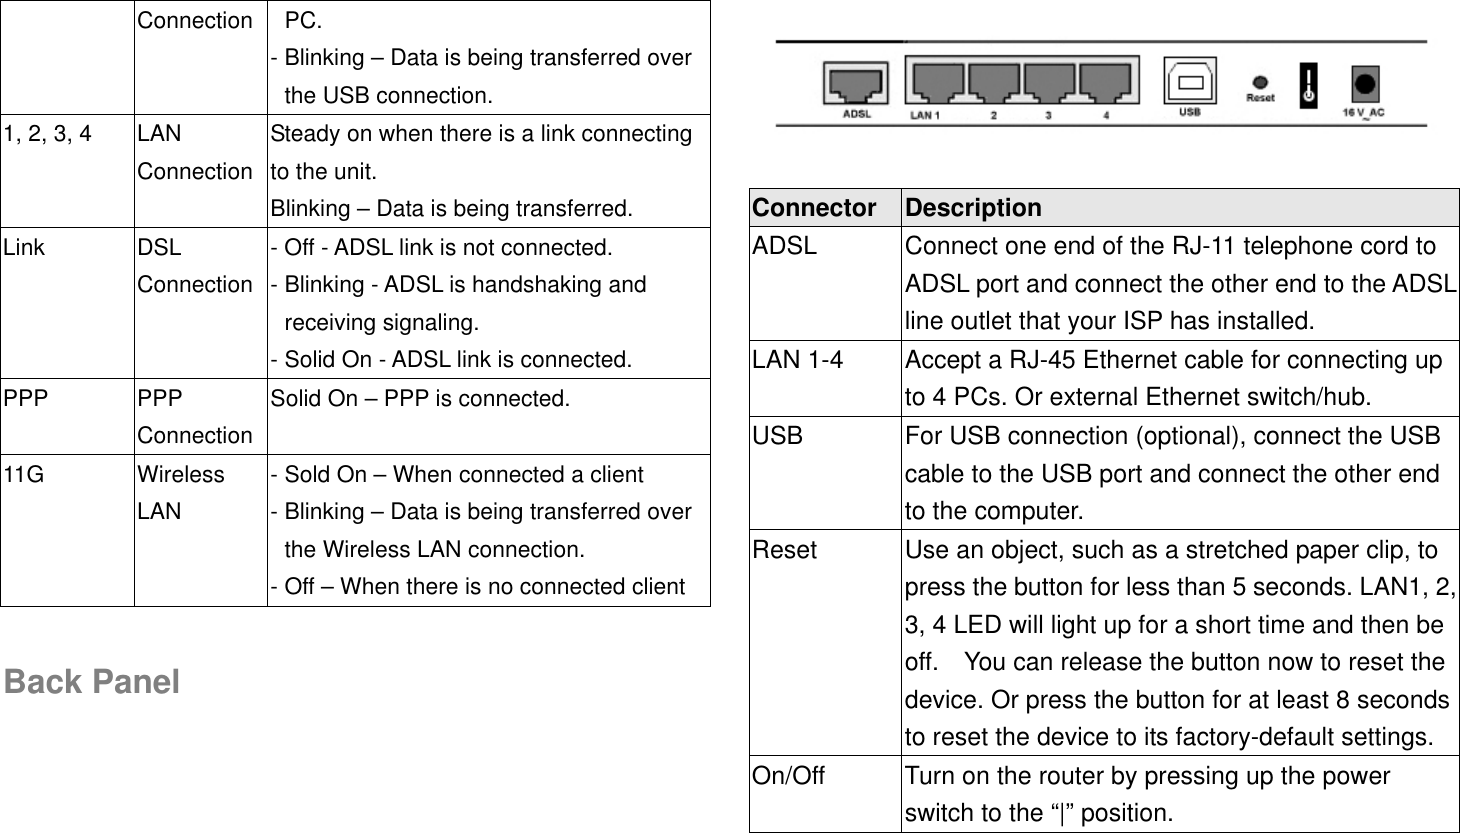 Connection PC. - Blinking – Data is being transferred over the USB connection. 1, 2, 3, 4  LAN Connection Steady on when there is a link connecting to the unit. Blinking – Data is being transferred. Link DSL Connection - Off - ADSL link is not connected. - Blinking - ADSL is handshaking and receiving signaling. - Solid On - ADSL link is connected. PPP PPP Connection Solid On – PPP is connected. 11G Wireless LAN - Sold On – When connected a client - Blinking – Data is being transferred over the Wireless LAN connection. - Off – When there is no connected client  Back Panel    Connector  Description ADSL  Connect one end of the RJ-11 telephone cord to ADSL port and connect the other end to the ADSL line outlet that your ISP has installed. LAN 1-4  Accept a RJ-45 Ethernet cable for connecting up to 4 PCs. Or external Ethernet switch/hub. USB  For USB connection (optional), connect the USB cable to the USB port and connect the other end to the computer. Reset  Use an object, such as a stretched paper clip, to press the button for less than 5 seconds. LAN1, 2, 3, 4 LED will light up for a short time and then be off.    You can release the button now to reset the device. Or press the button for at least 8 seconds to reset the device to its factory-default settings. On/Off  Turn on the router by pressing up the power switch to the “|” position. 